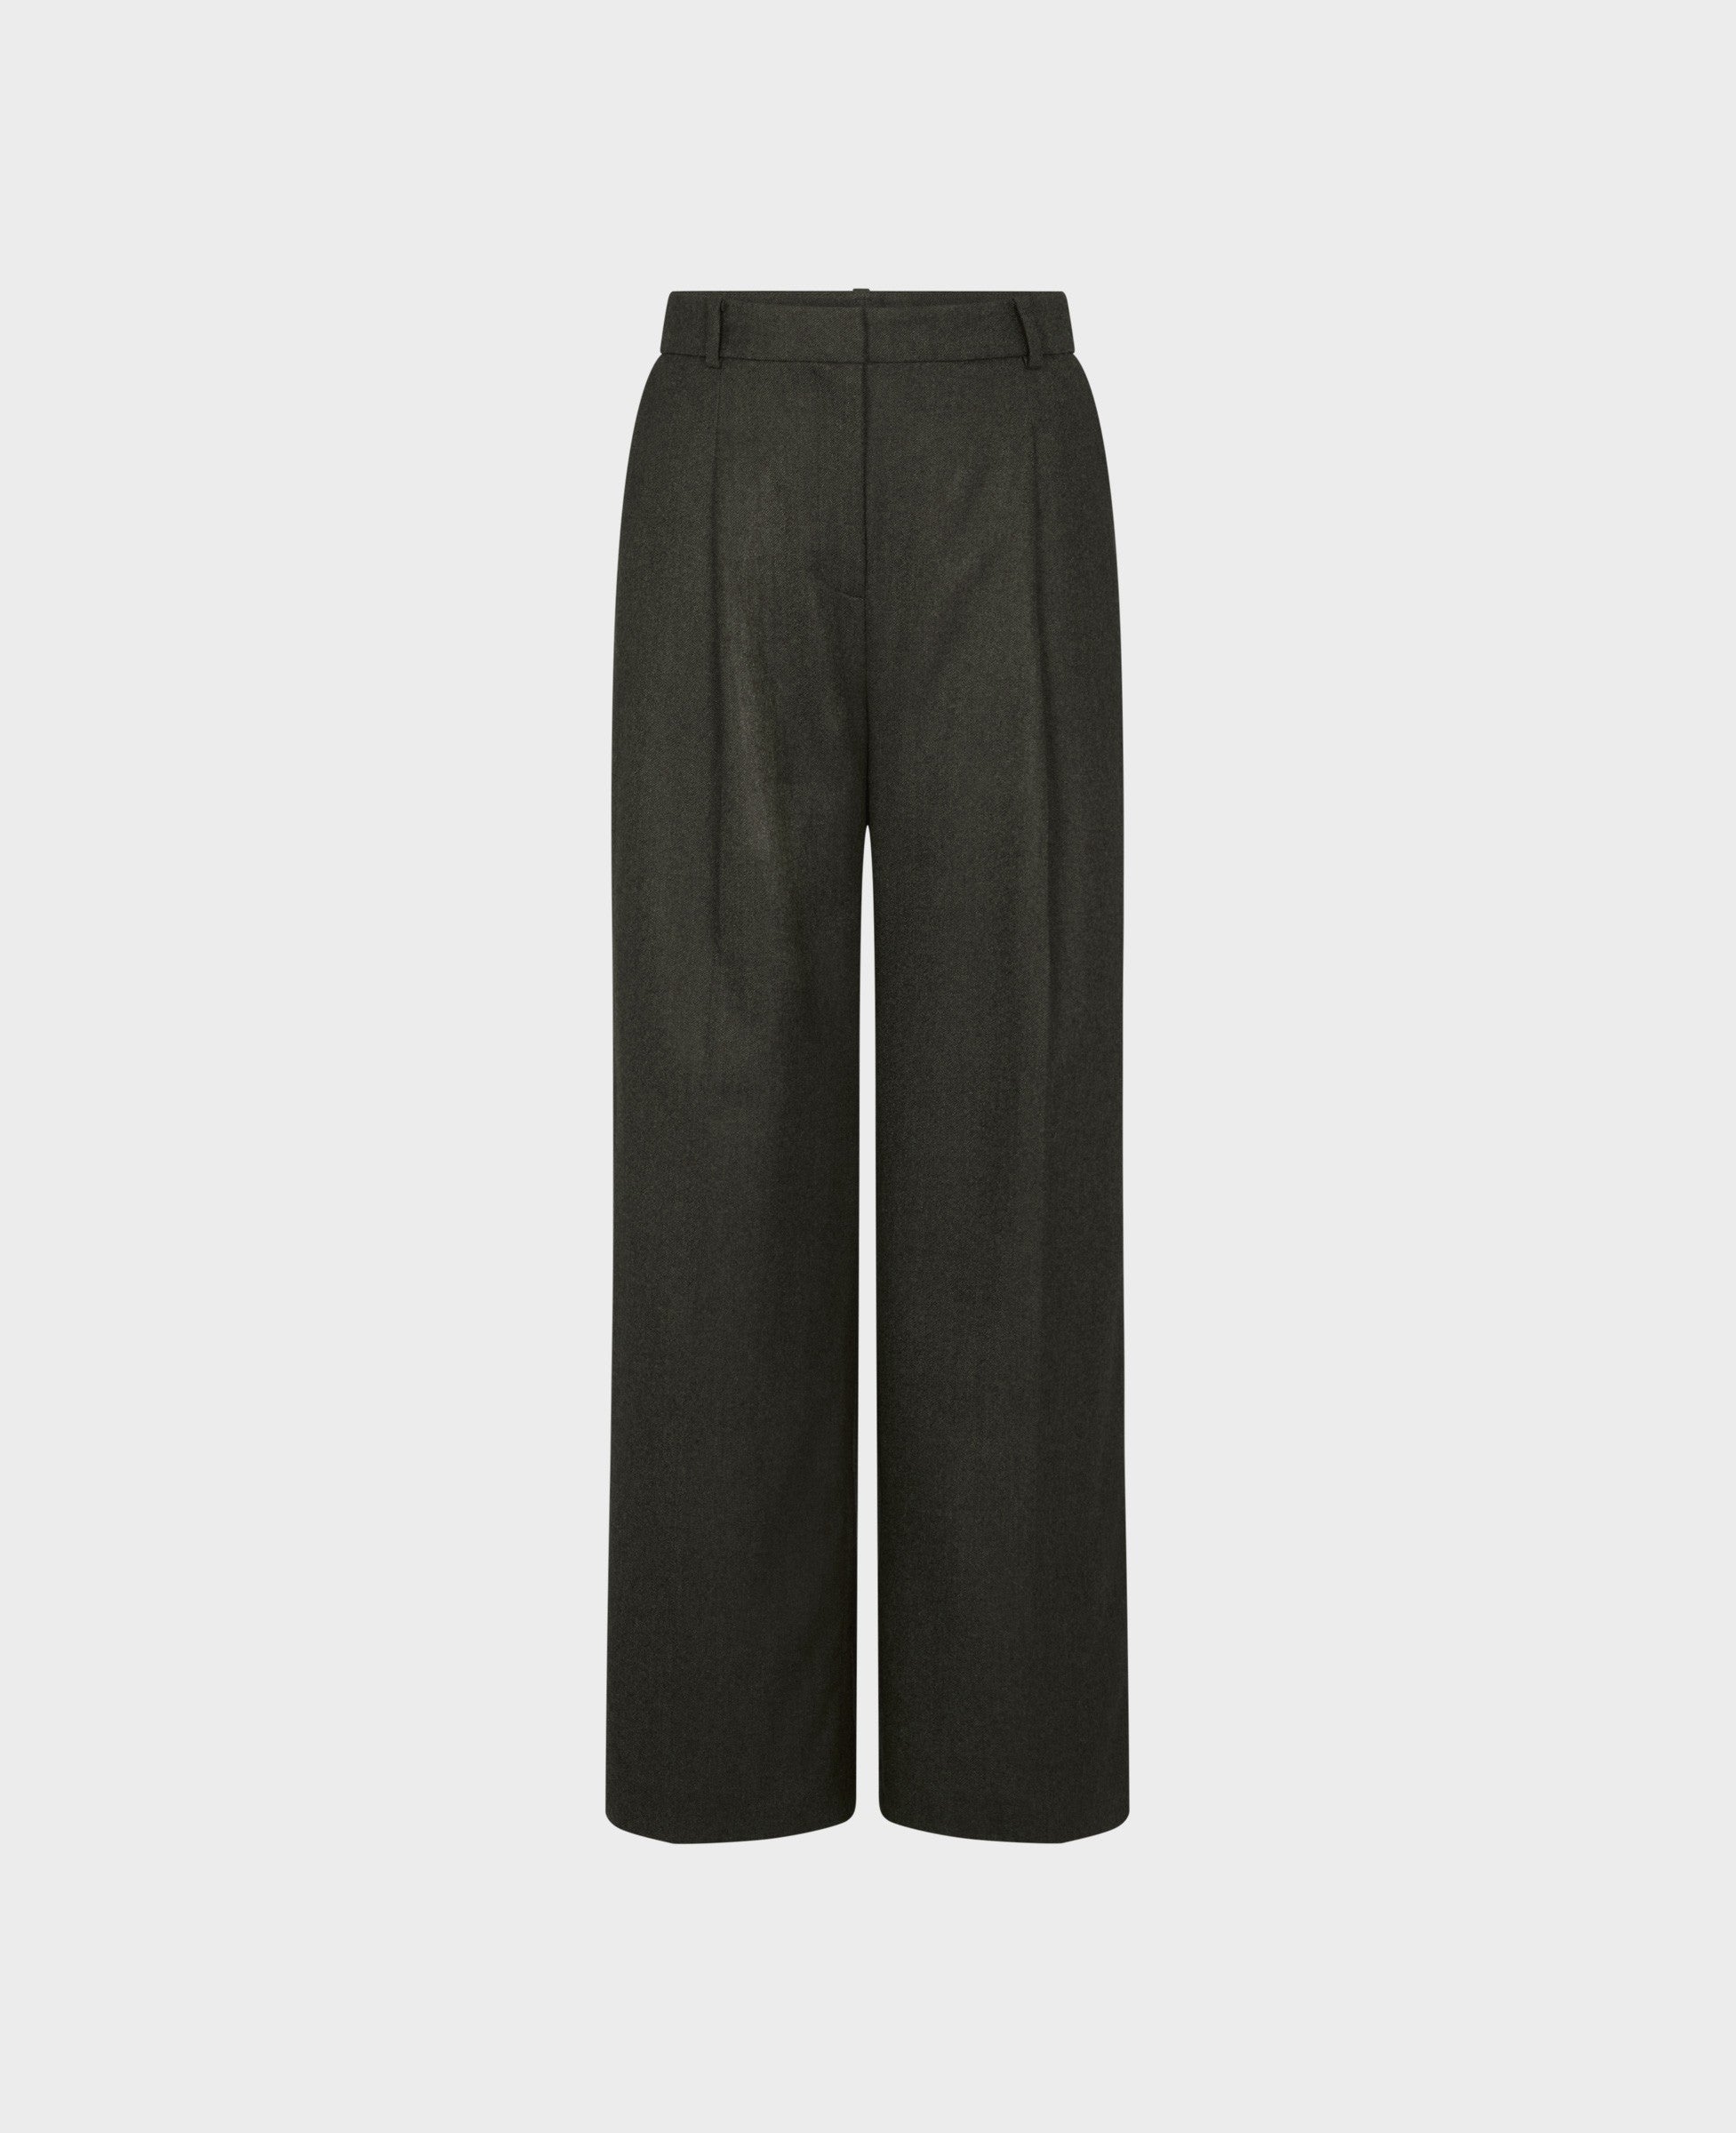 These Wide Leg Pleated Trousers in Ivy Green are perfect for any occasion. Crafted from a Scottish Wool and Linen Blend, they exude comfort and style. Pair with our Single-breasted Wool Jacket to create a matching look.